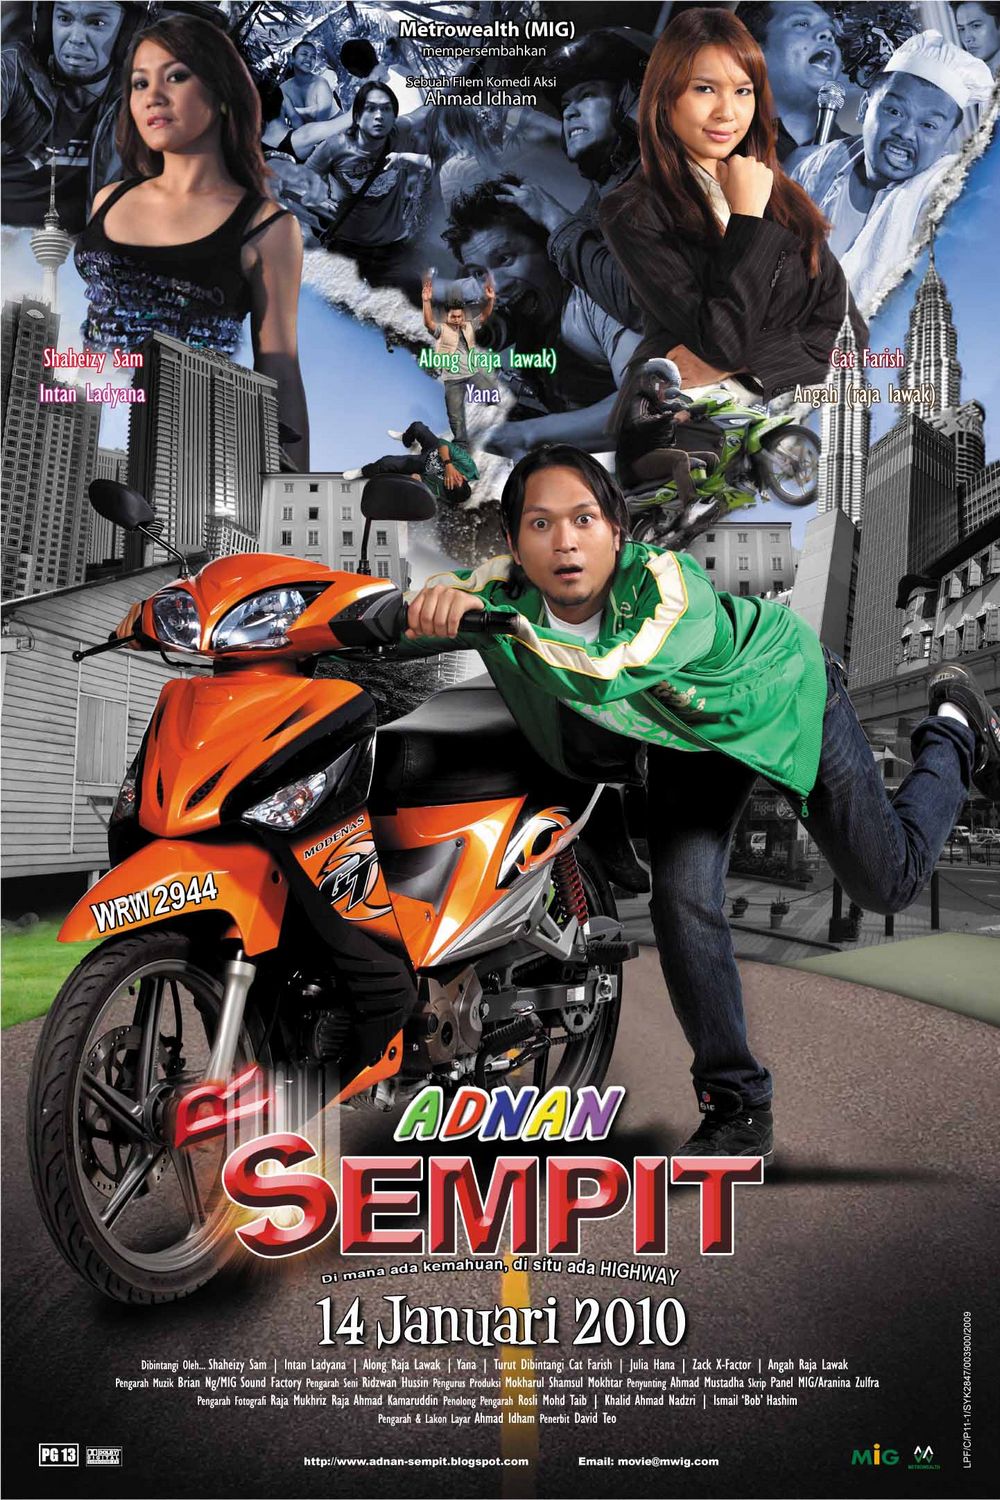 Extra Large Movie Poster Image for Adnan semp-it 